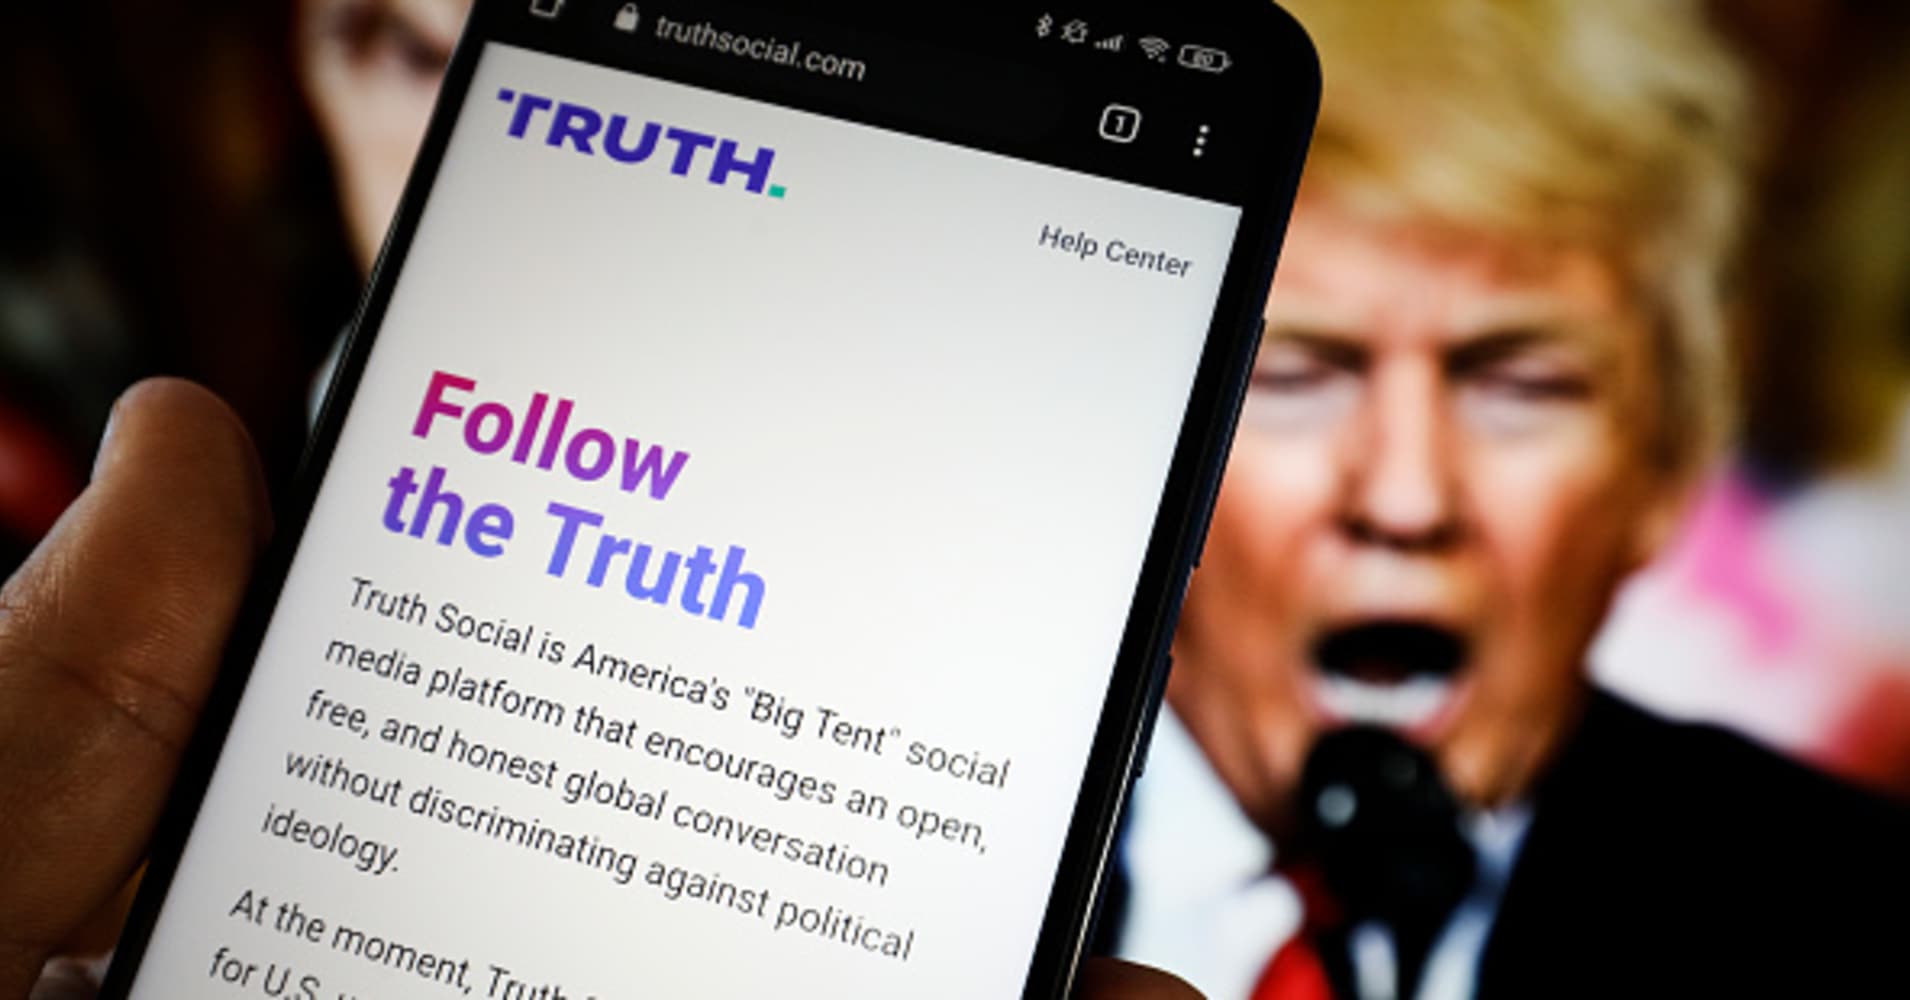 trump tries to boost support for truth social as his media stock tanks